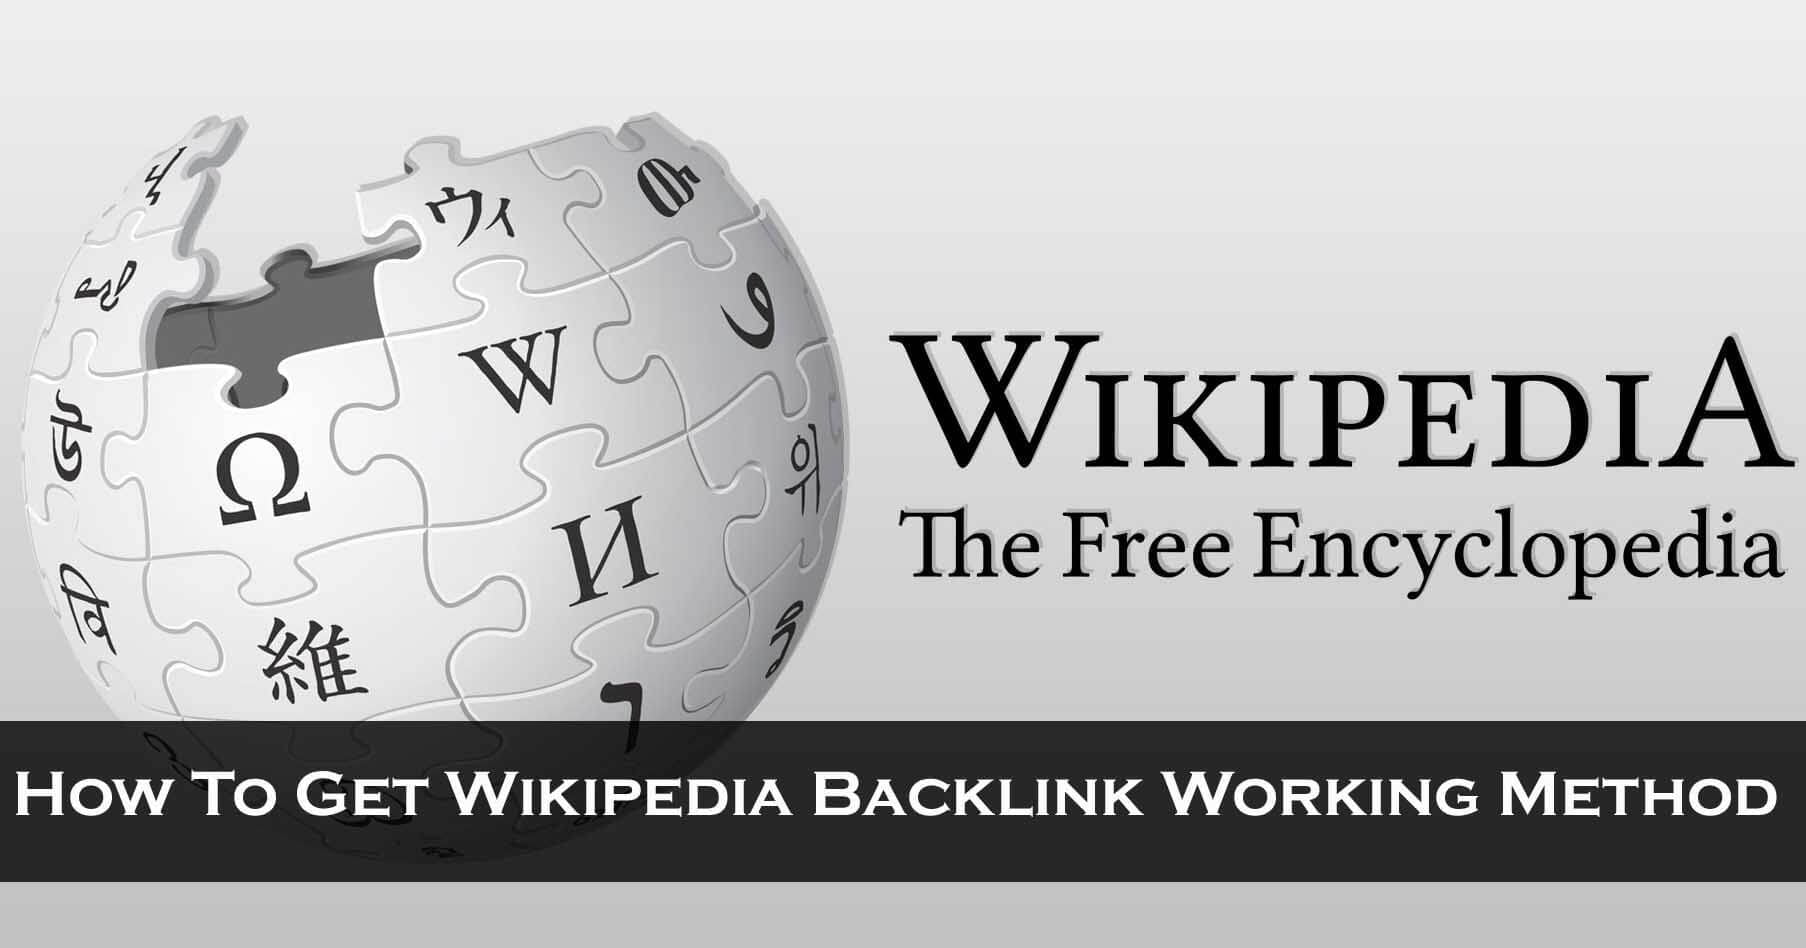 How To Get Wikipedia Backlink Working Method